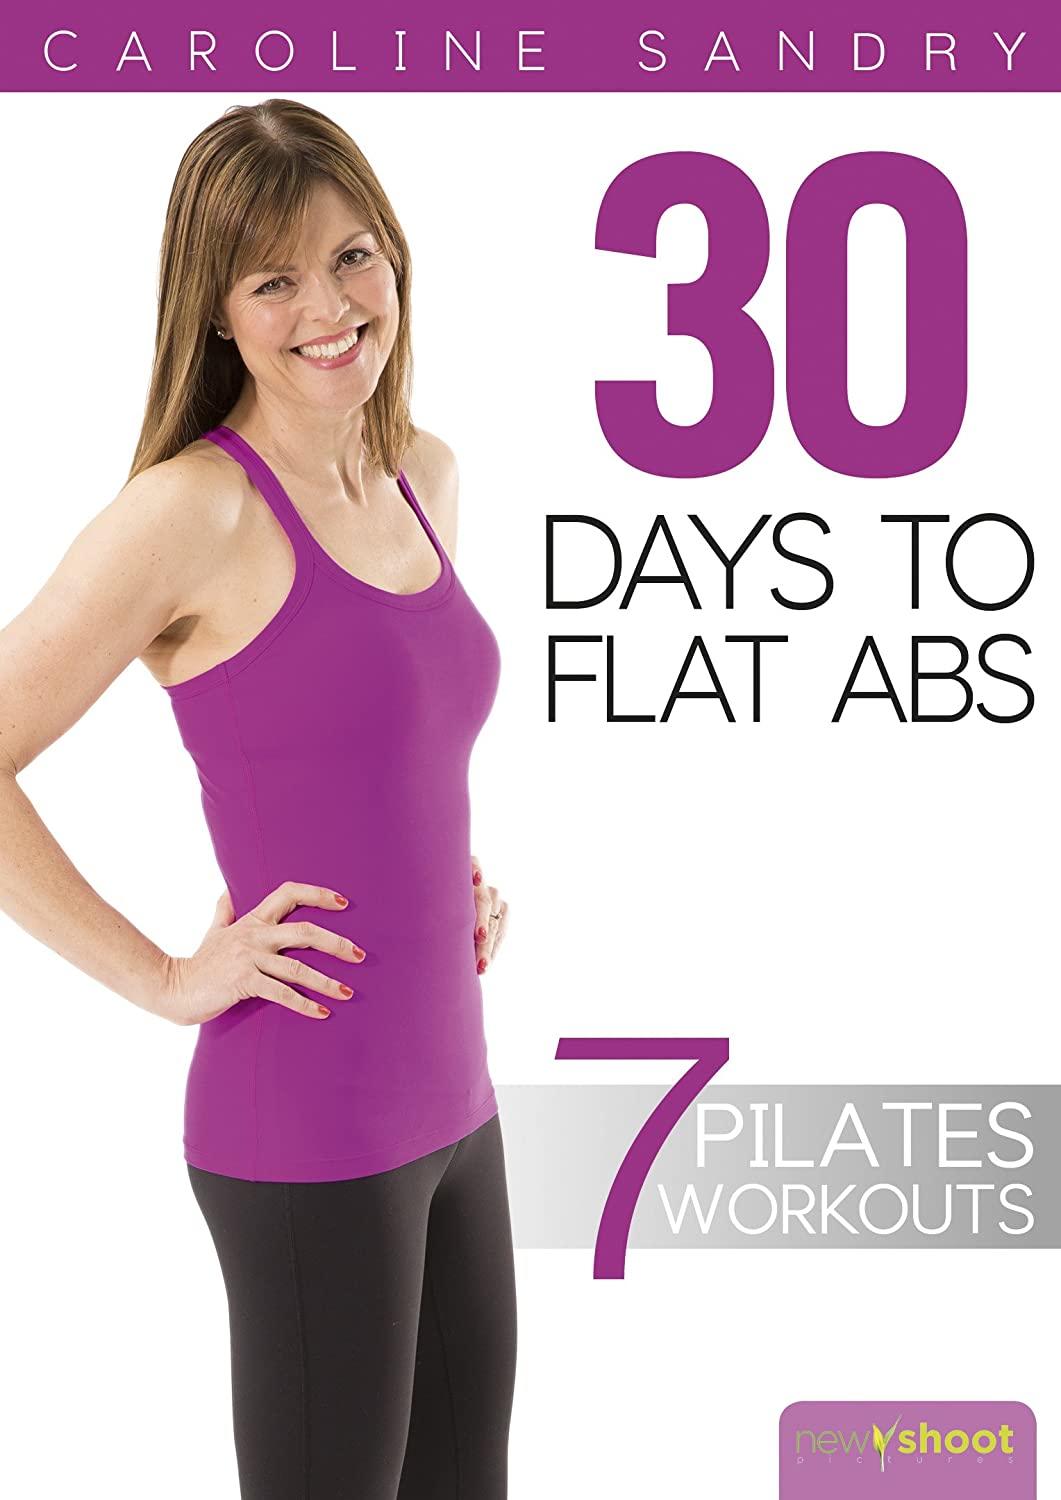 6 Day Best Beginner Ab Workout Dvd with Comfort Workout Clothes